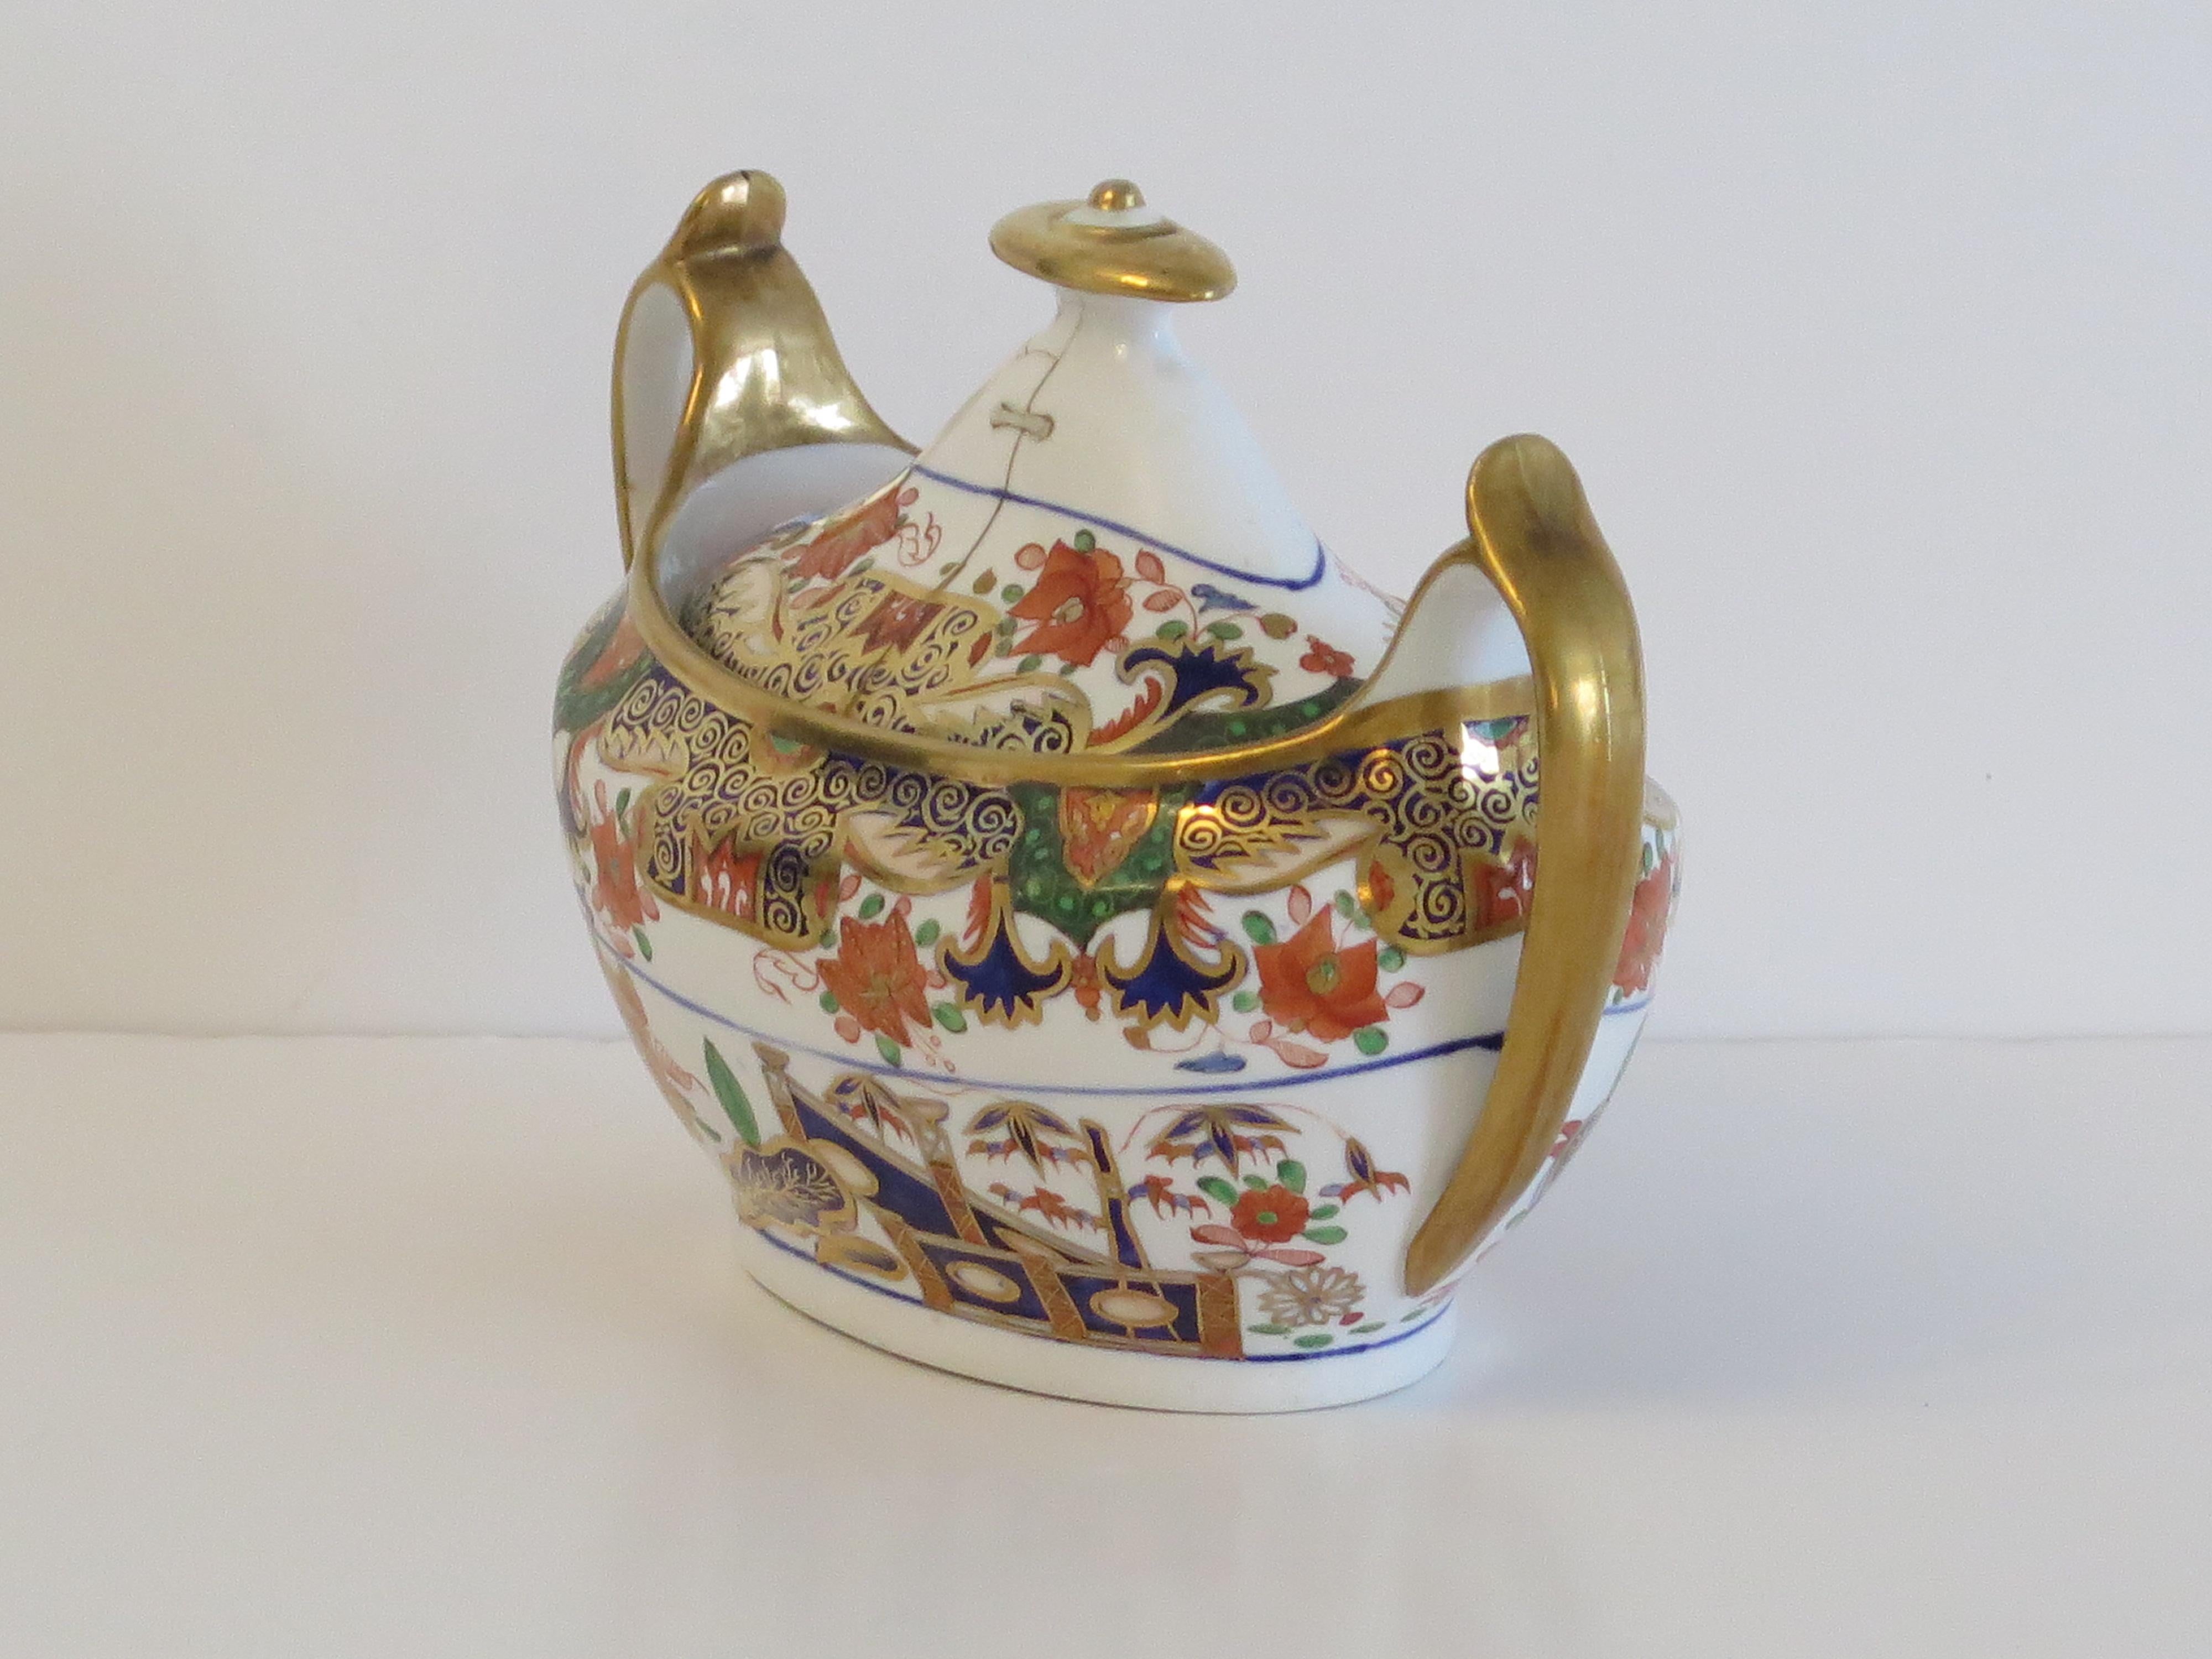 Spode Porcelain Sucrier Hand Painted and Gilded Pattern 967, circa 1810 In Good Condition For Sale In Lincoln, Lincolnshire